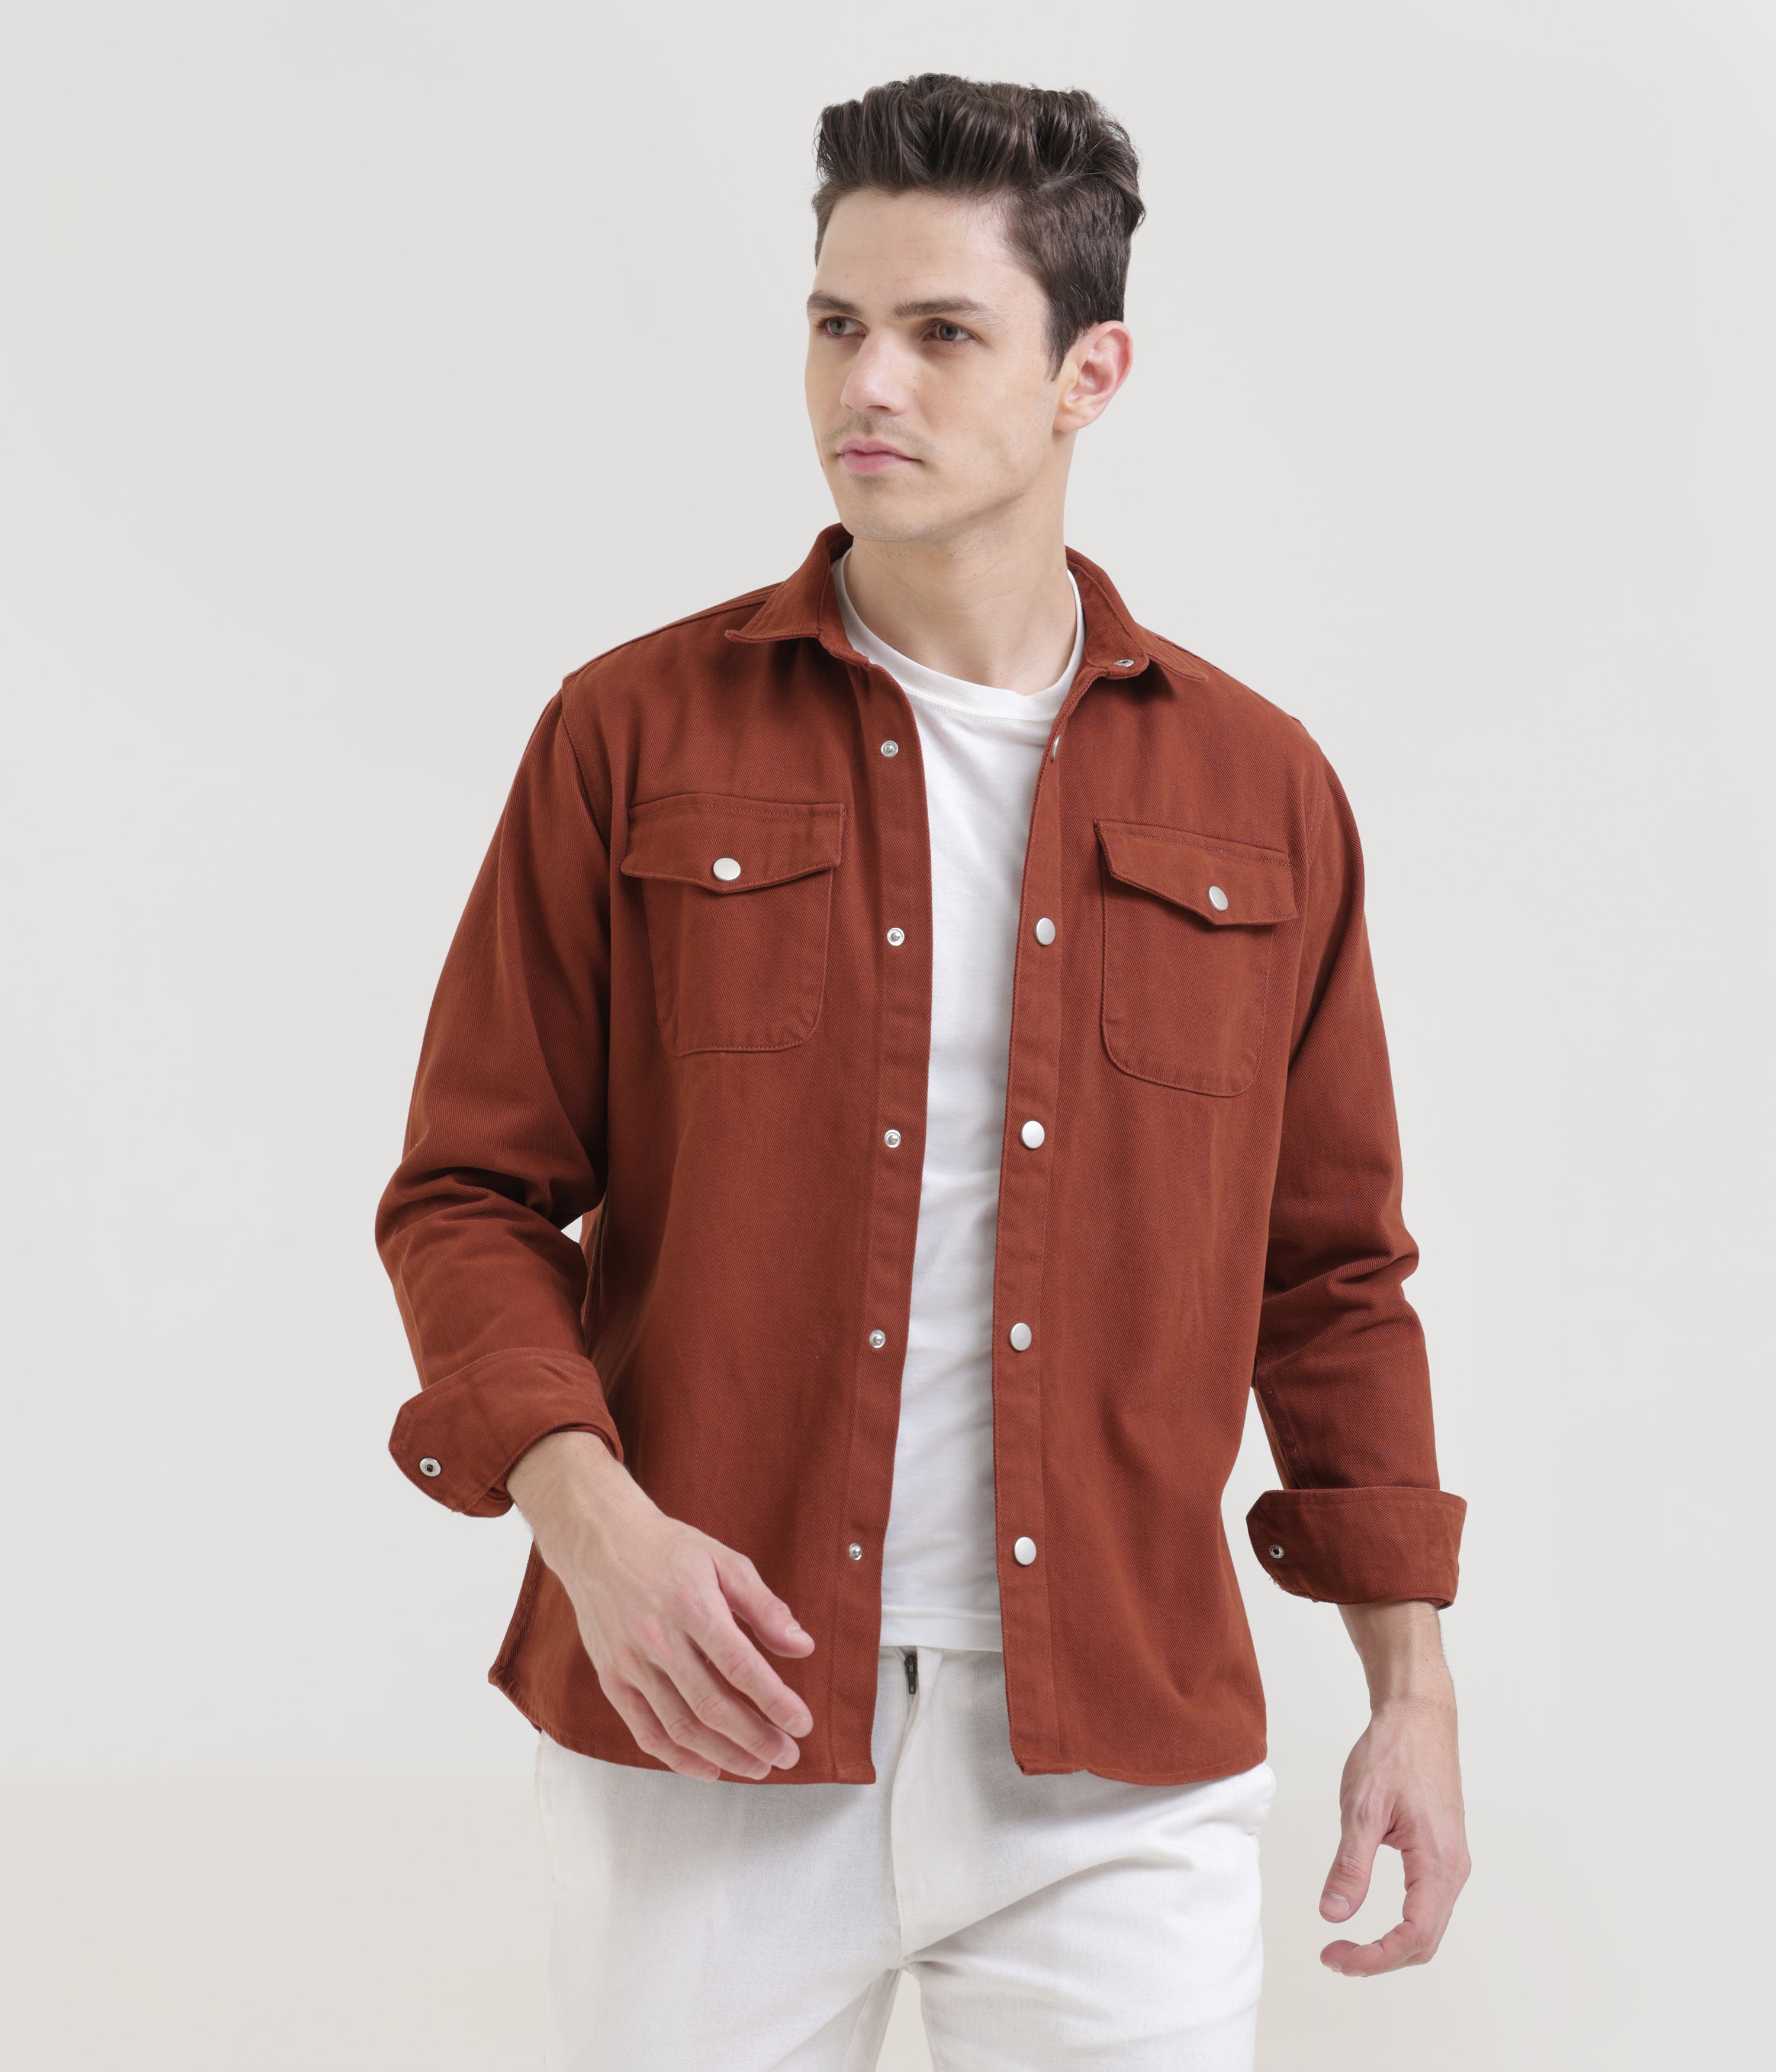 Burnt Orange Classic Fit Double Pocket Shirt in Heavy Twill Cotton